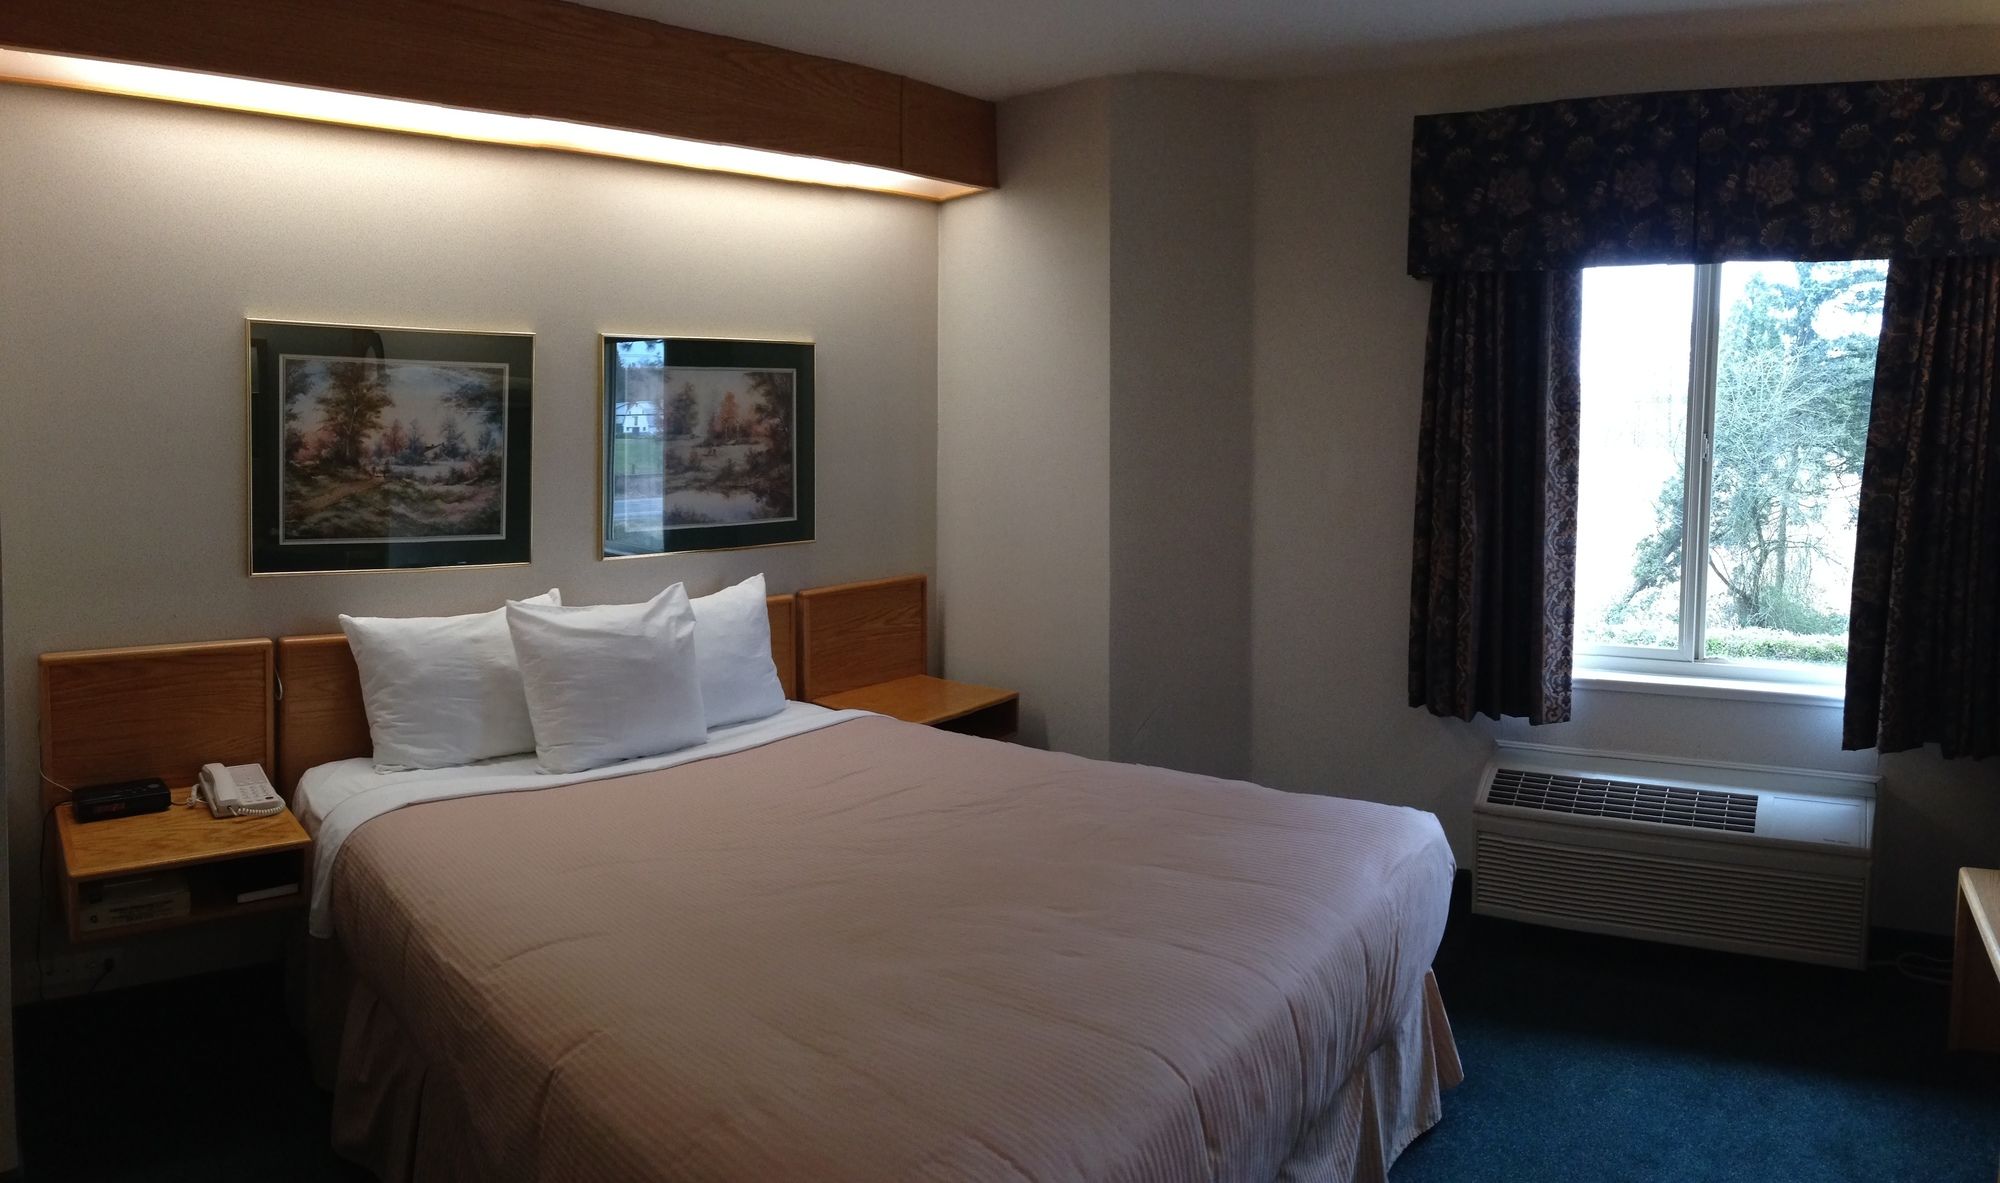 Canadas Best Value Inn Langley / Vancouver